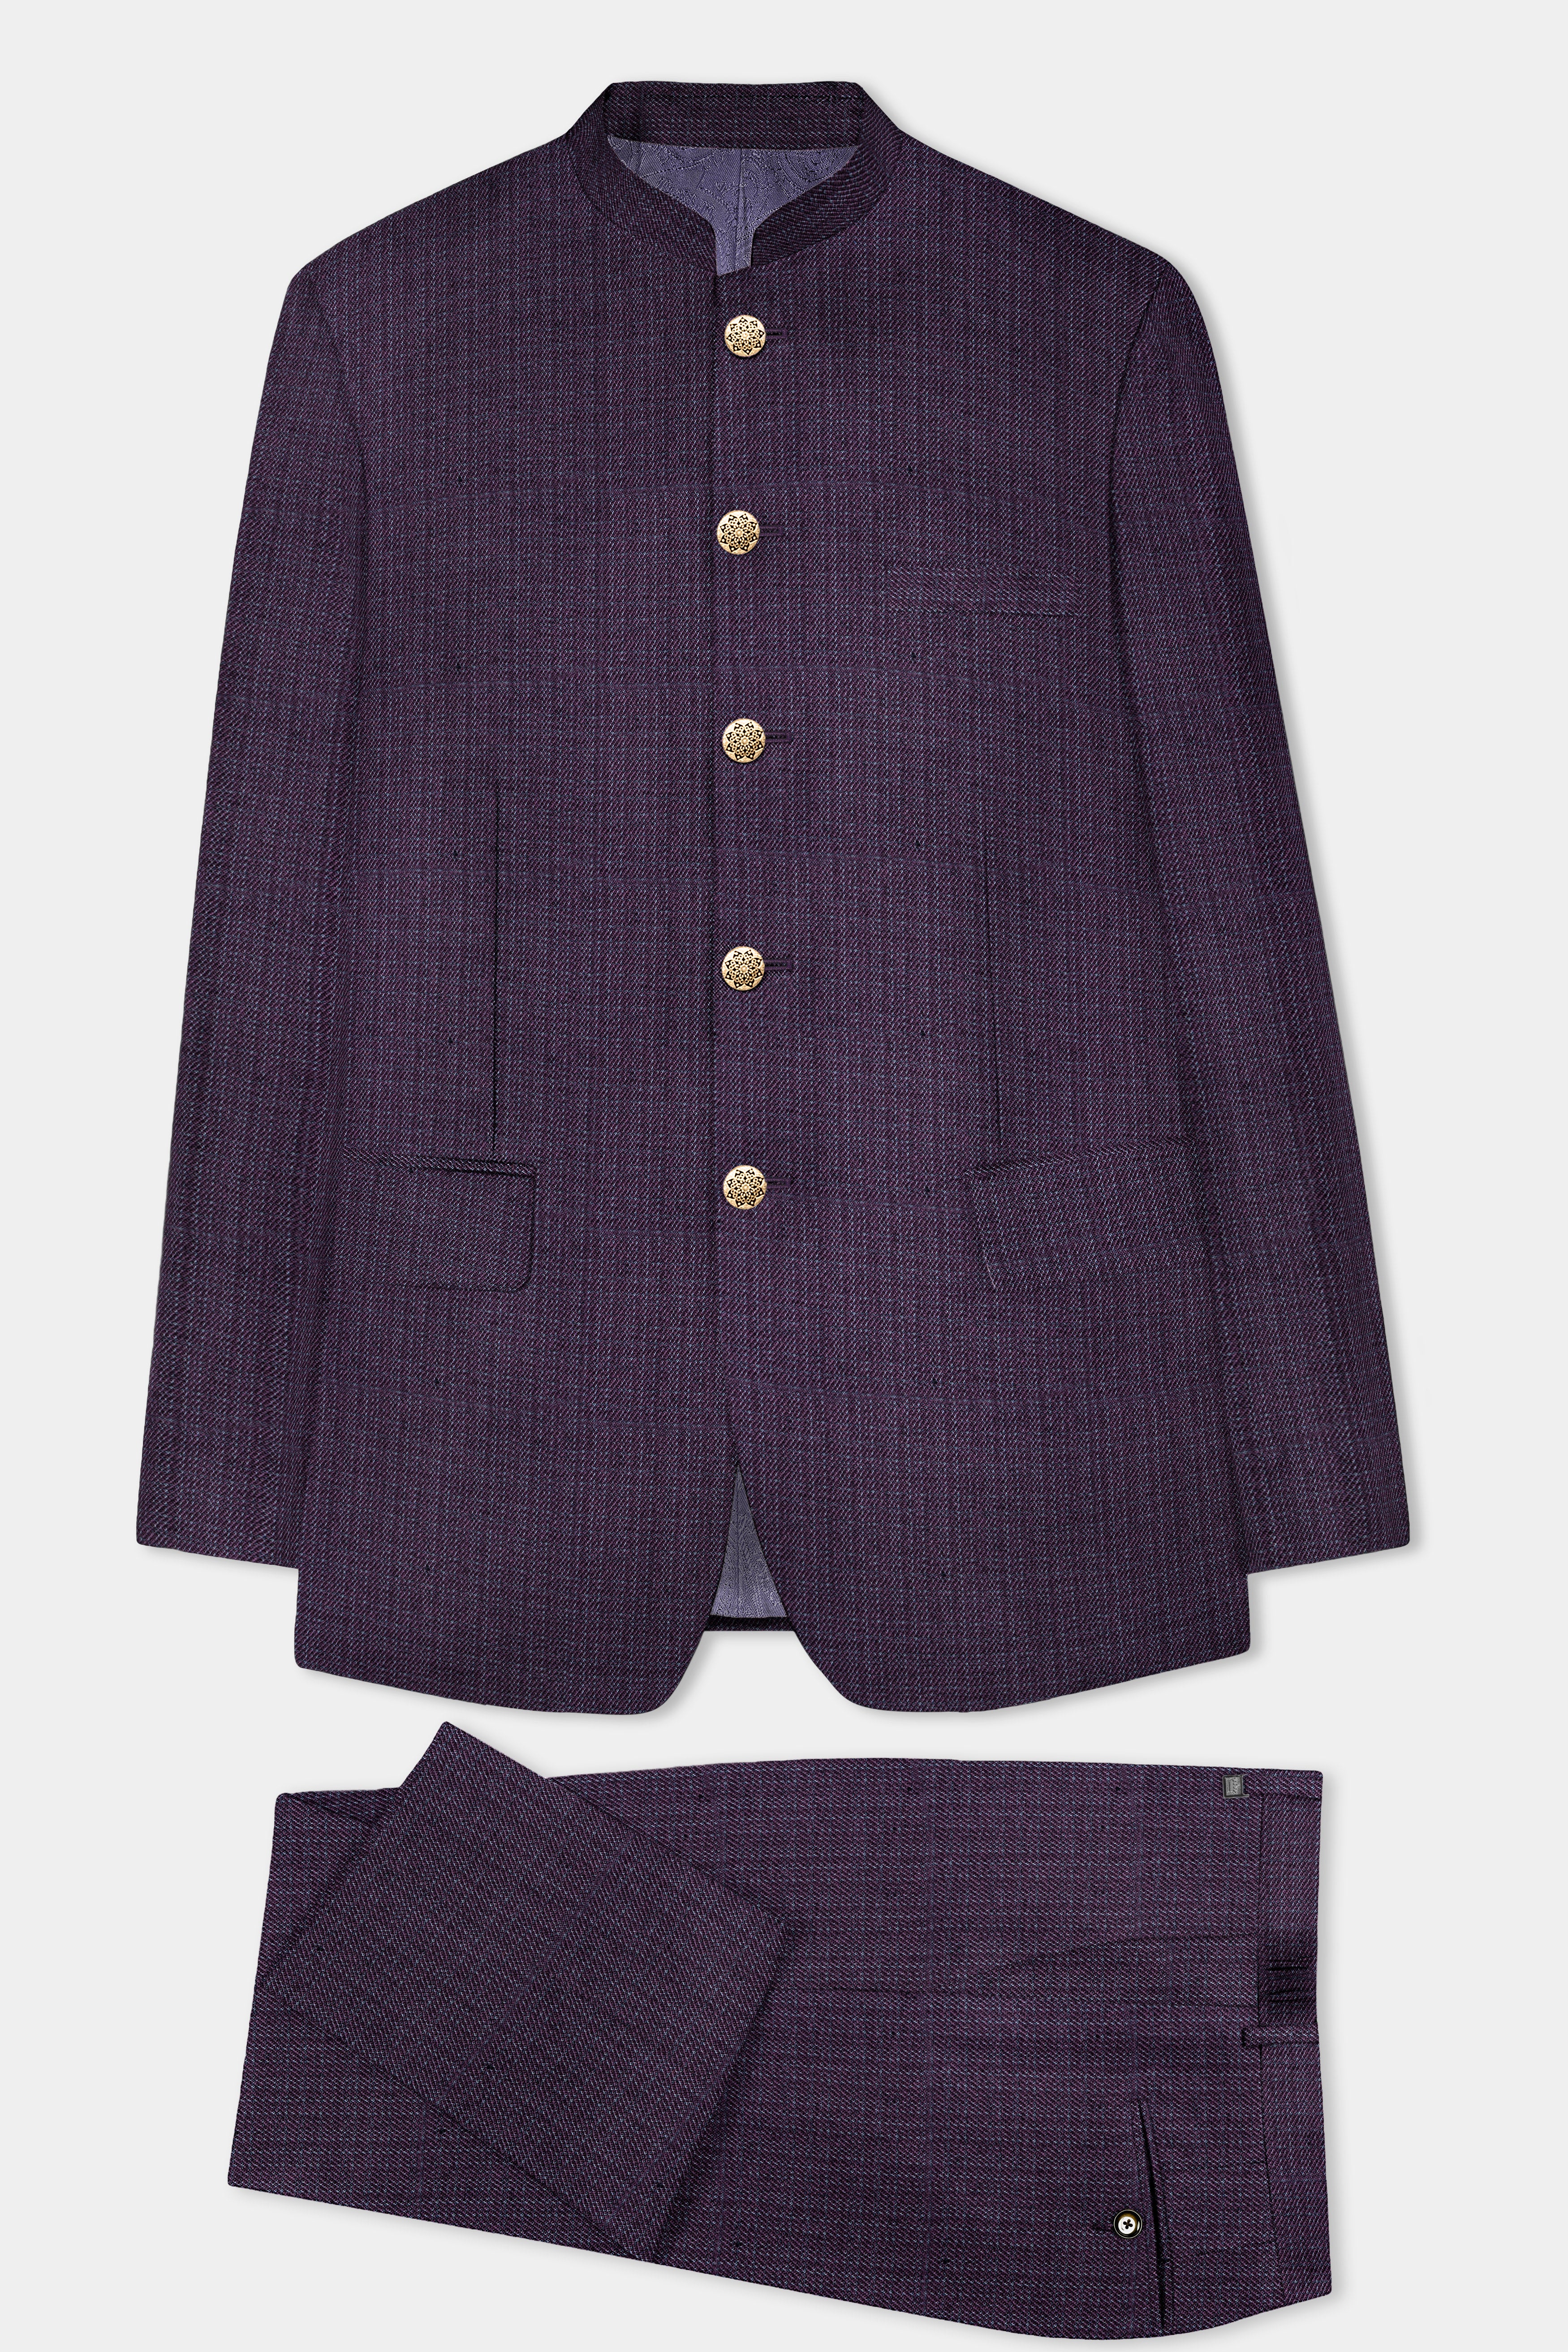 Blackcurrant Textured Wool Rich Bandhgala Suit